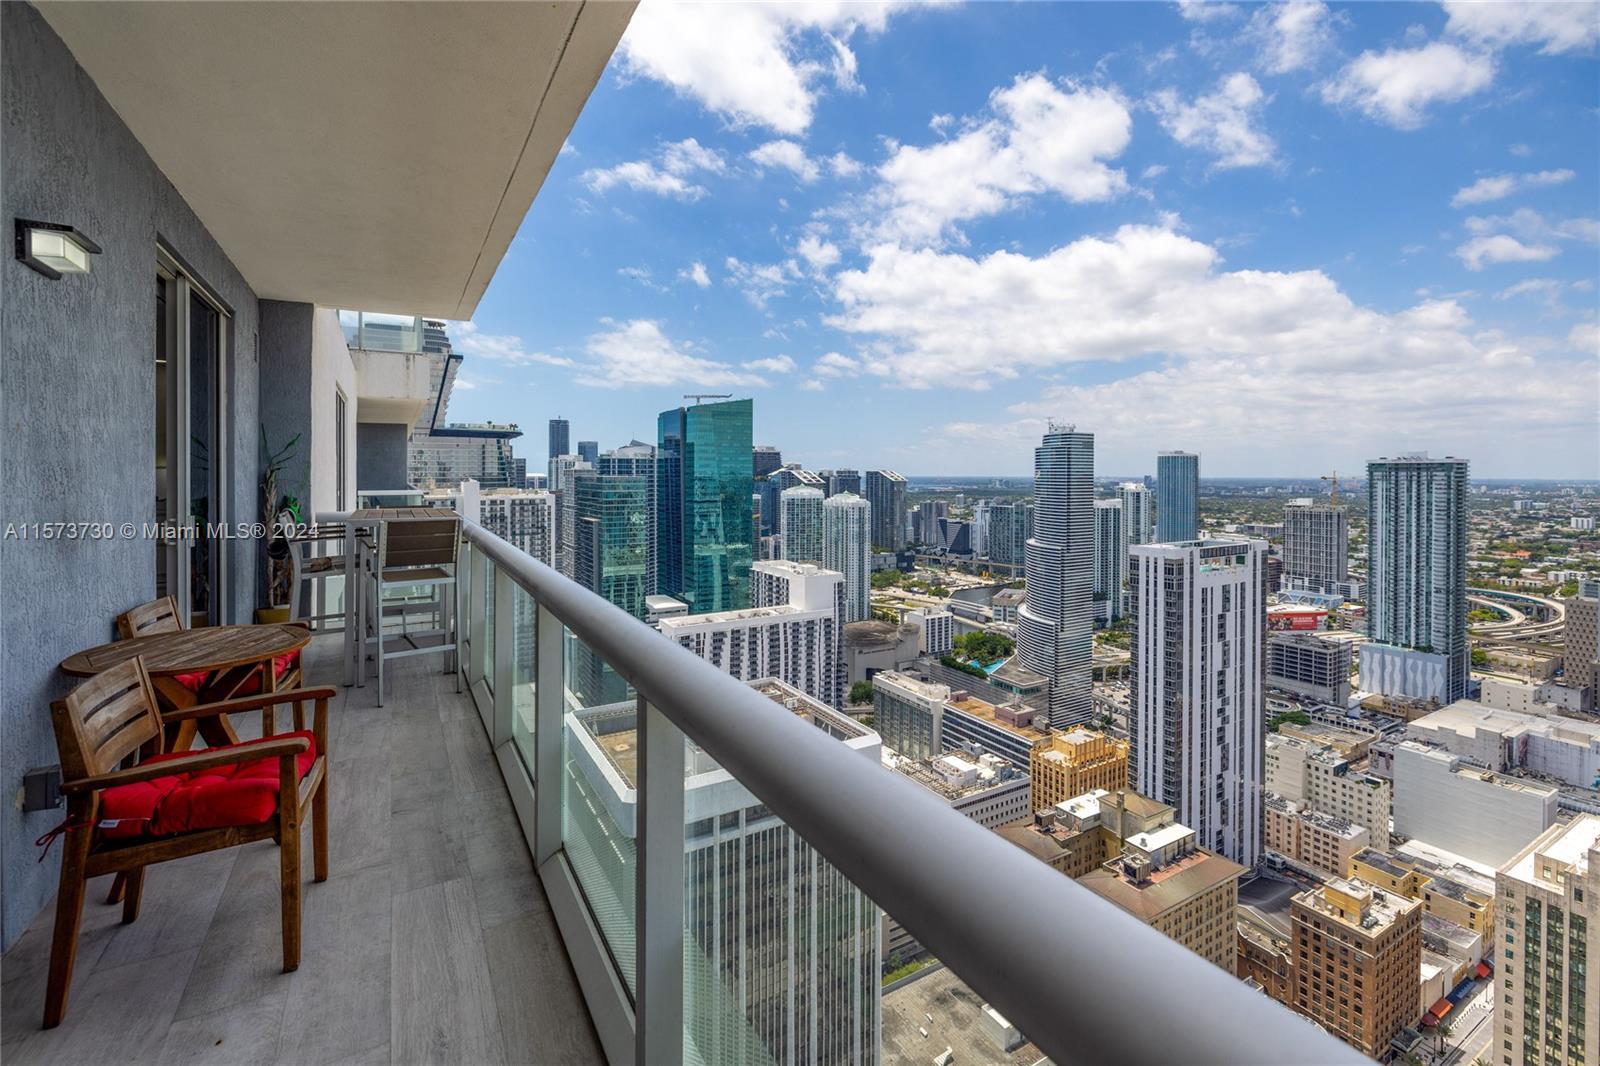 1 Bed 1 Bath + Den Penthouse Condo with Unobstructed Breathtaking City Views. Floor to Ceiling Impac